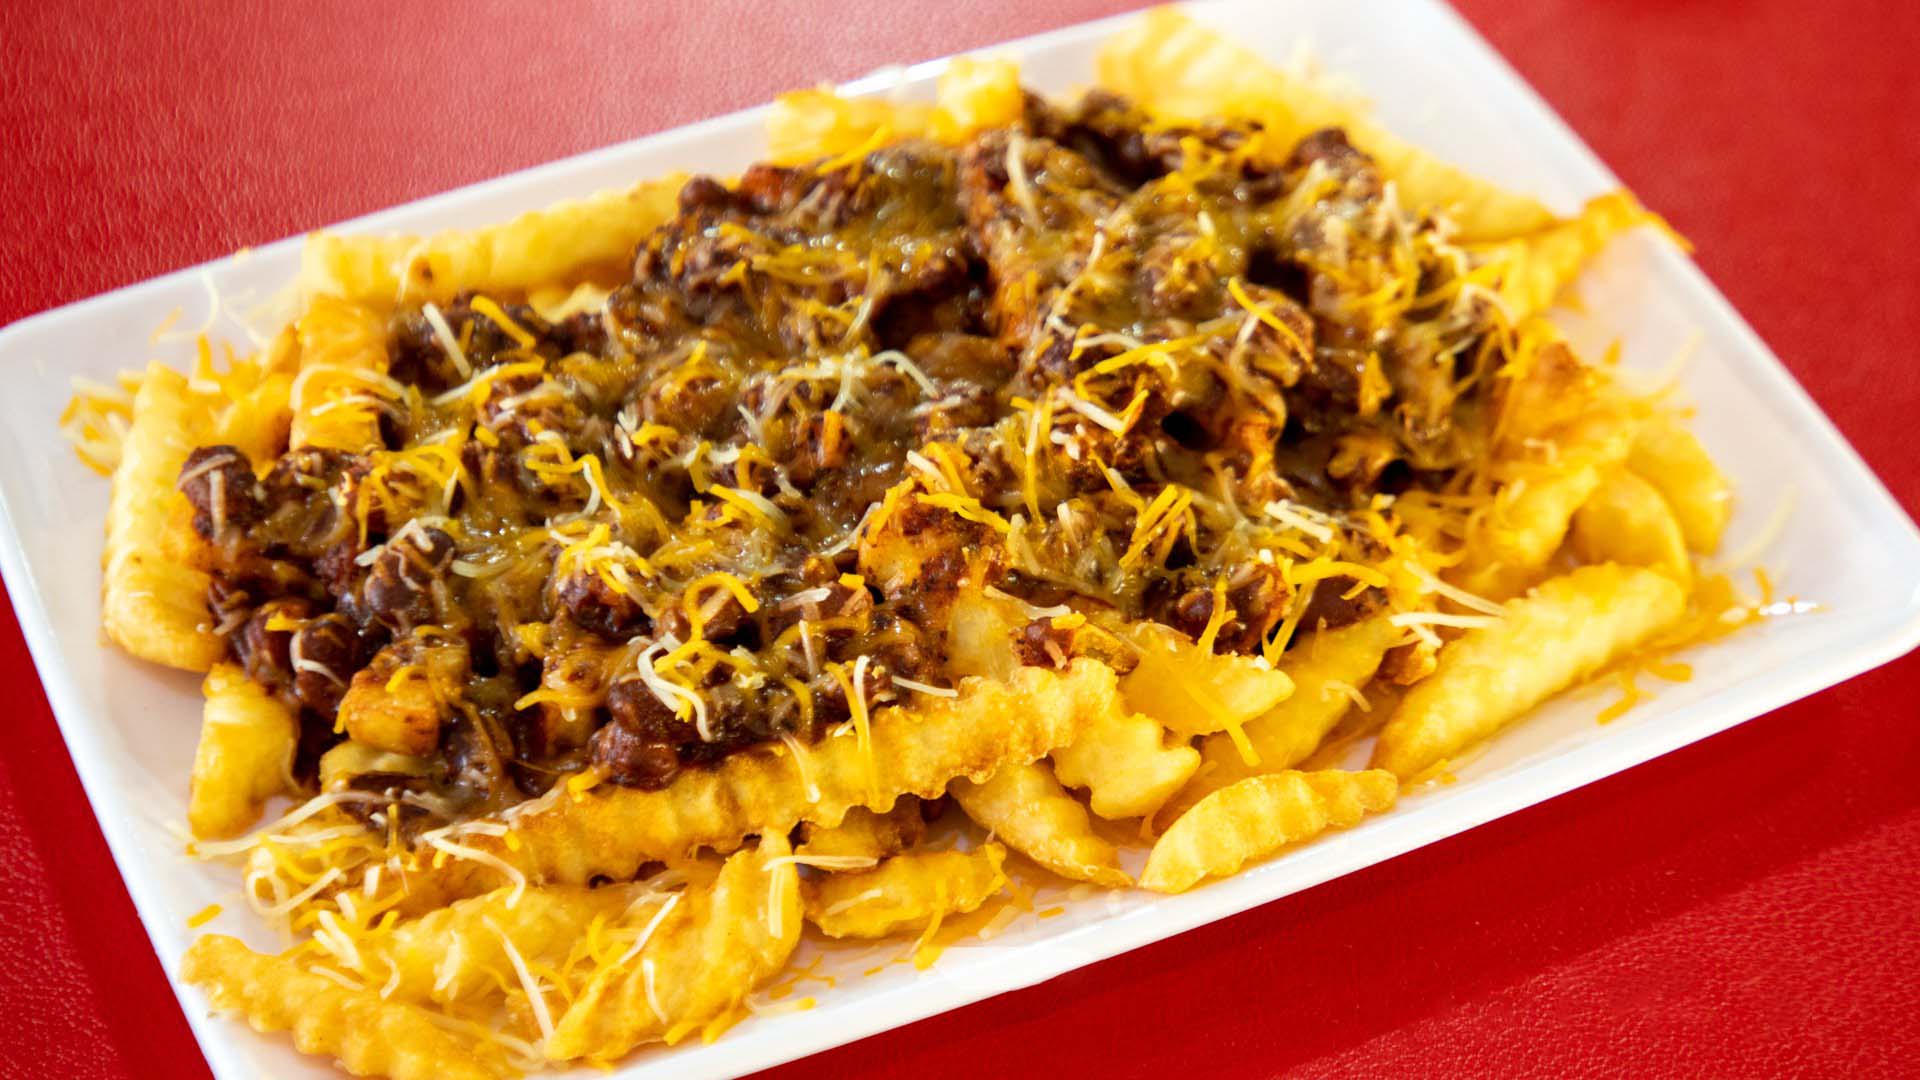 A plate of fries topped with shredded cheese and chili con carne on a red table.